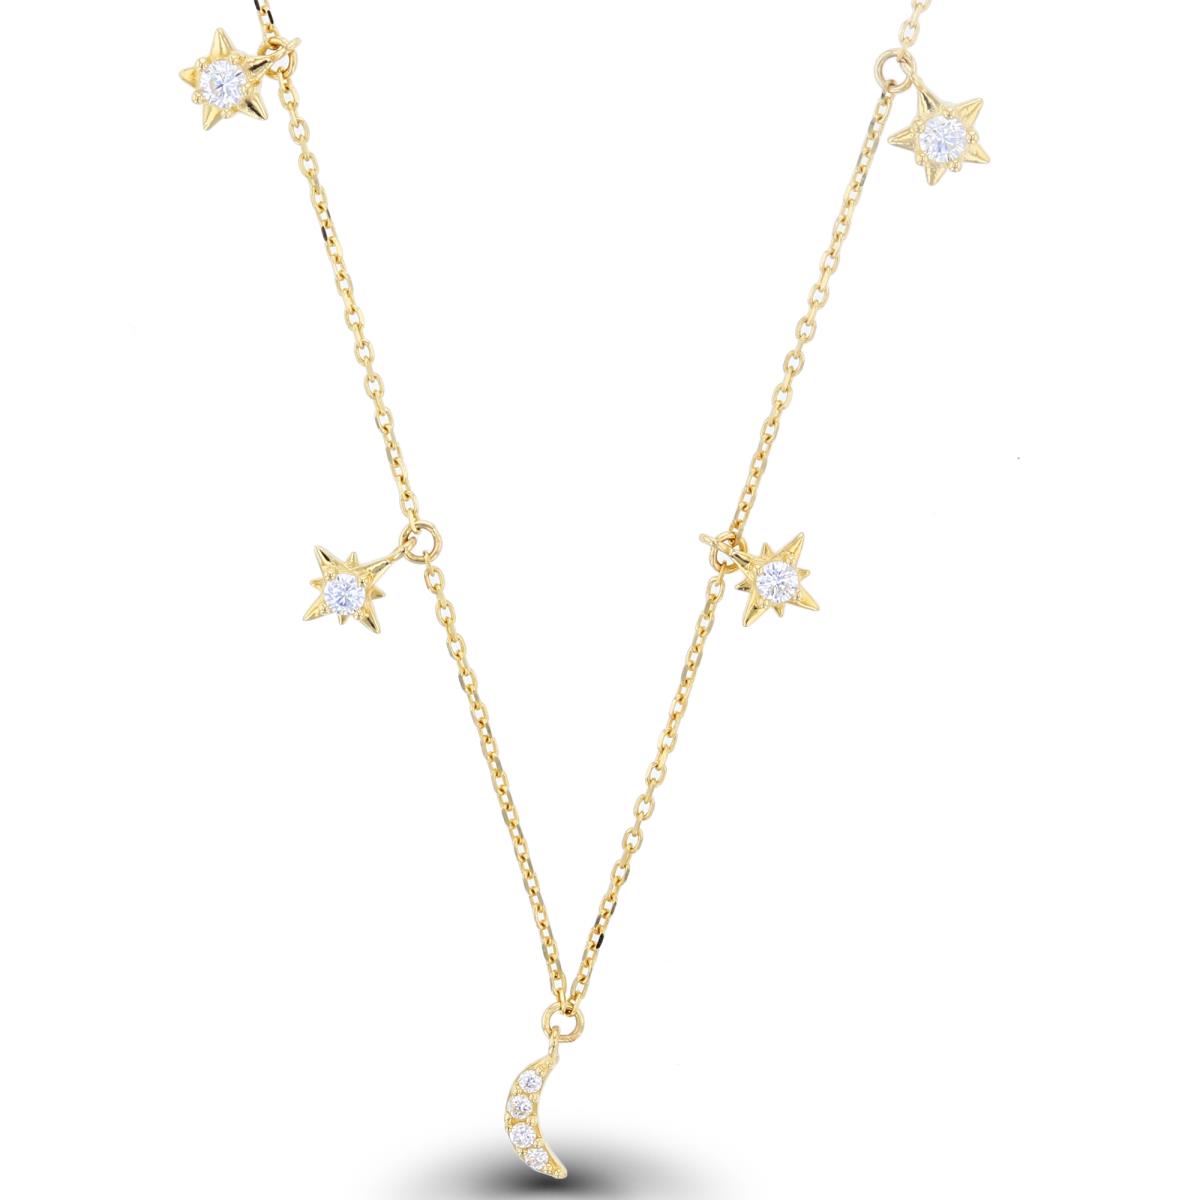 10K Yellow Gold Dangling Moon & Stars 16"+2" Necklace